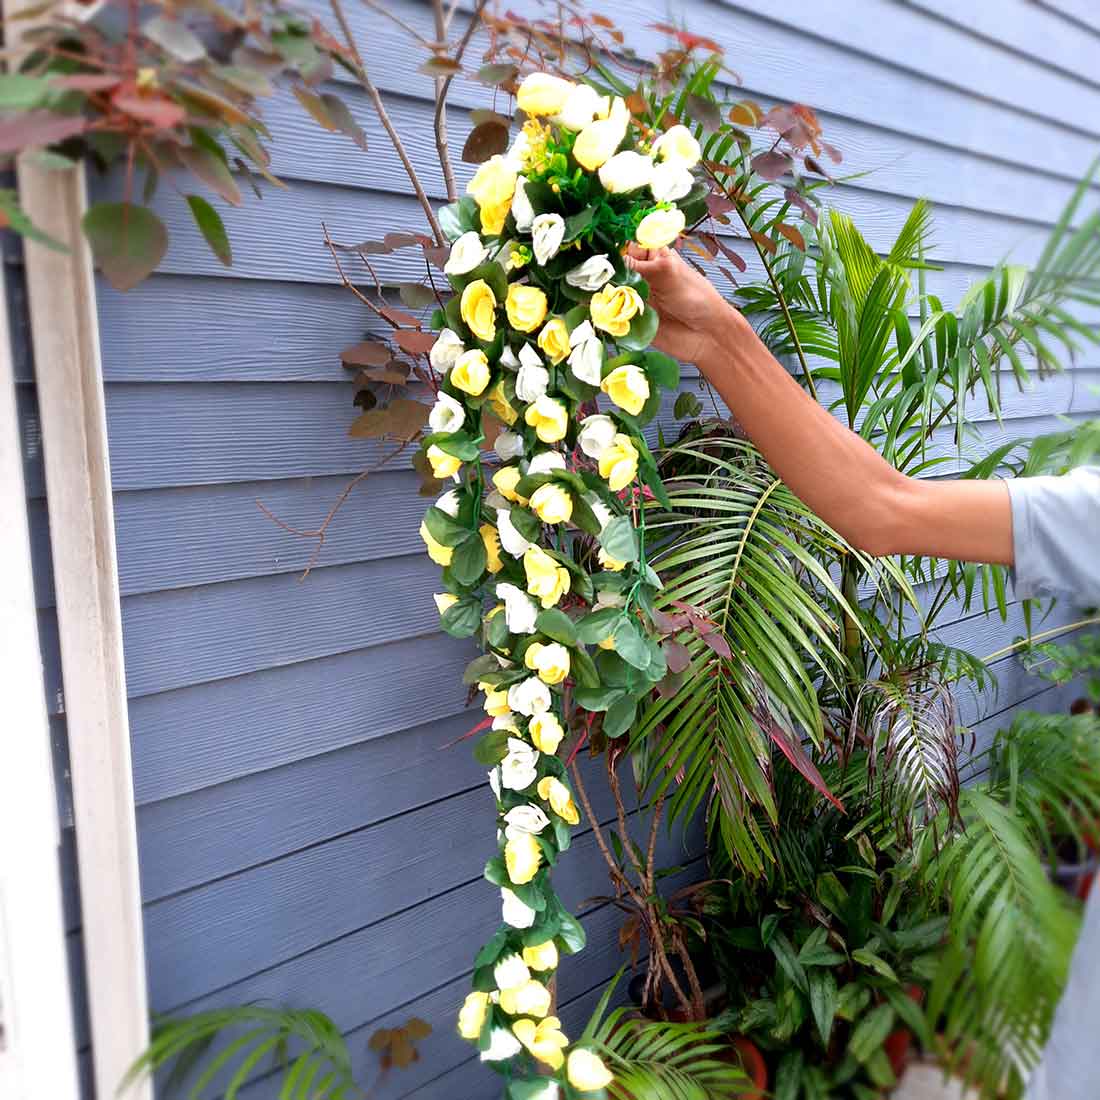 Artificial Wall Hanging Plants- Apkamart #color_Yellow & White